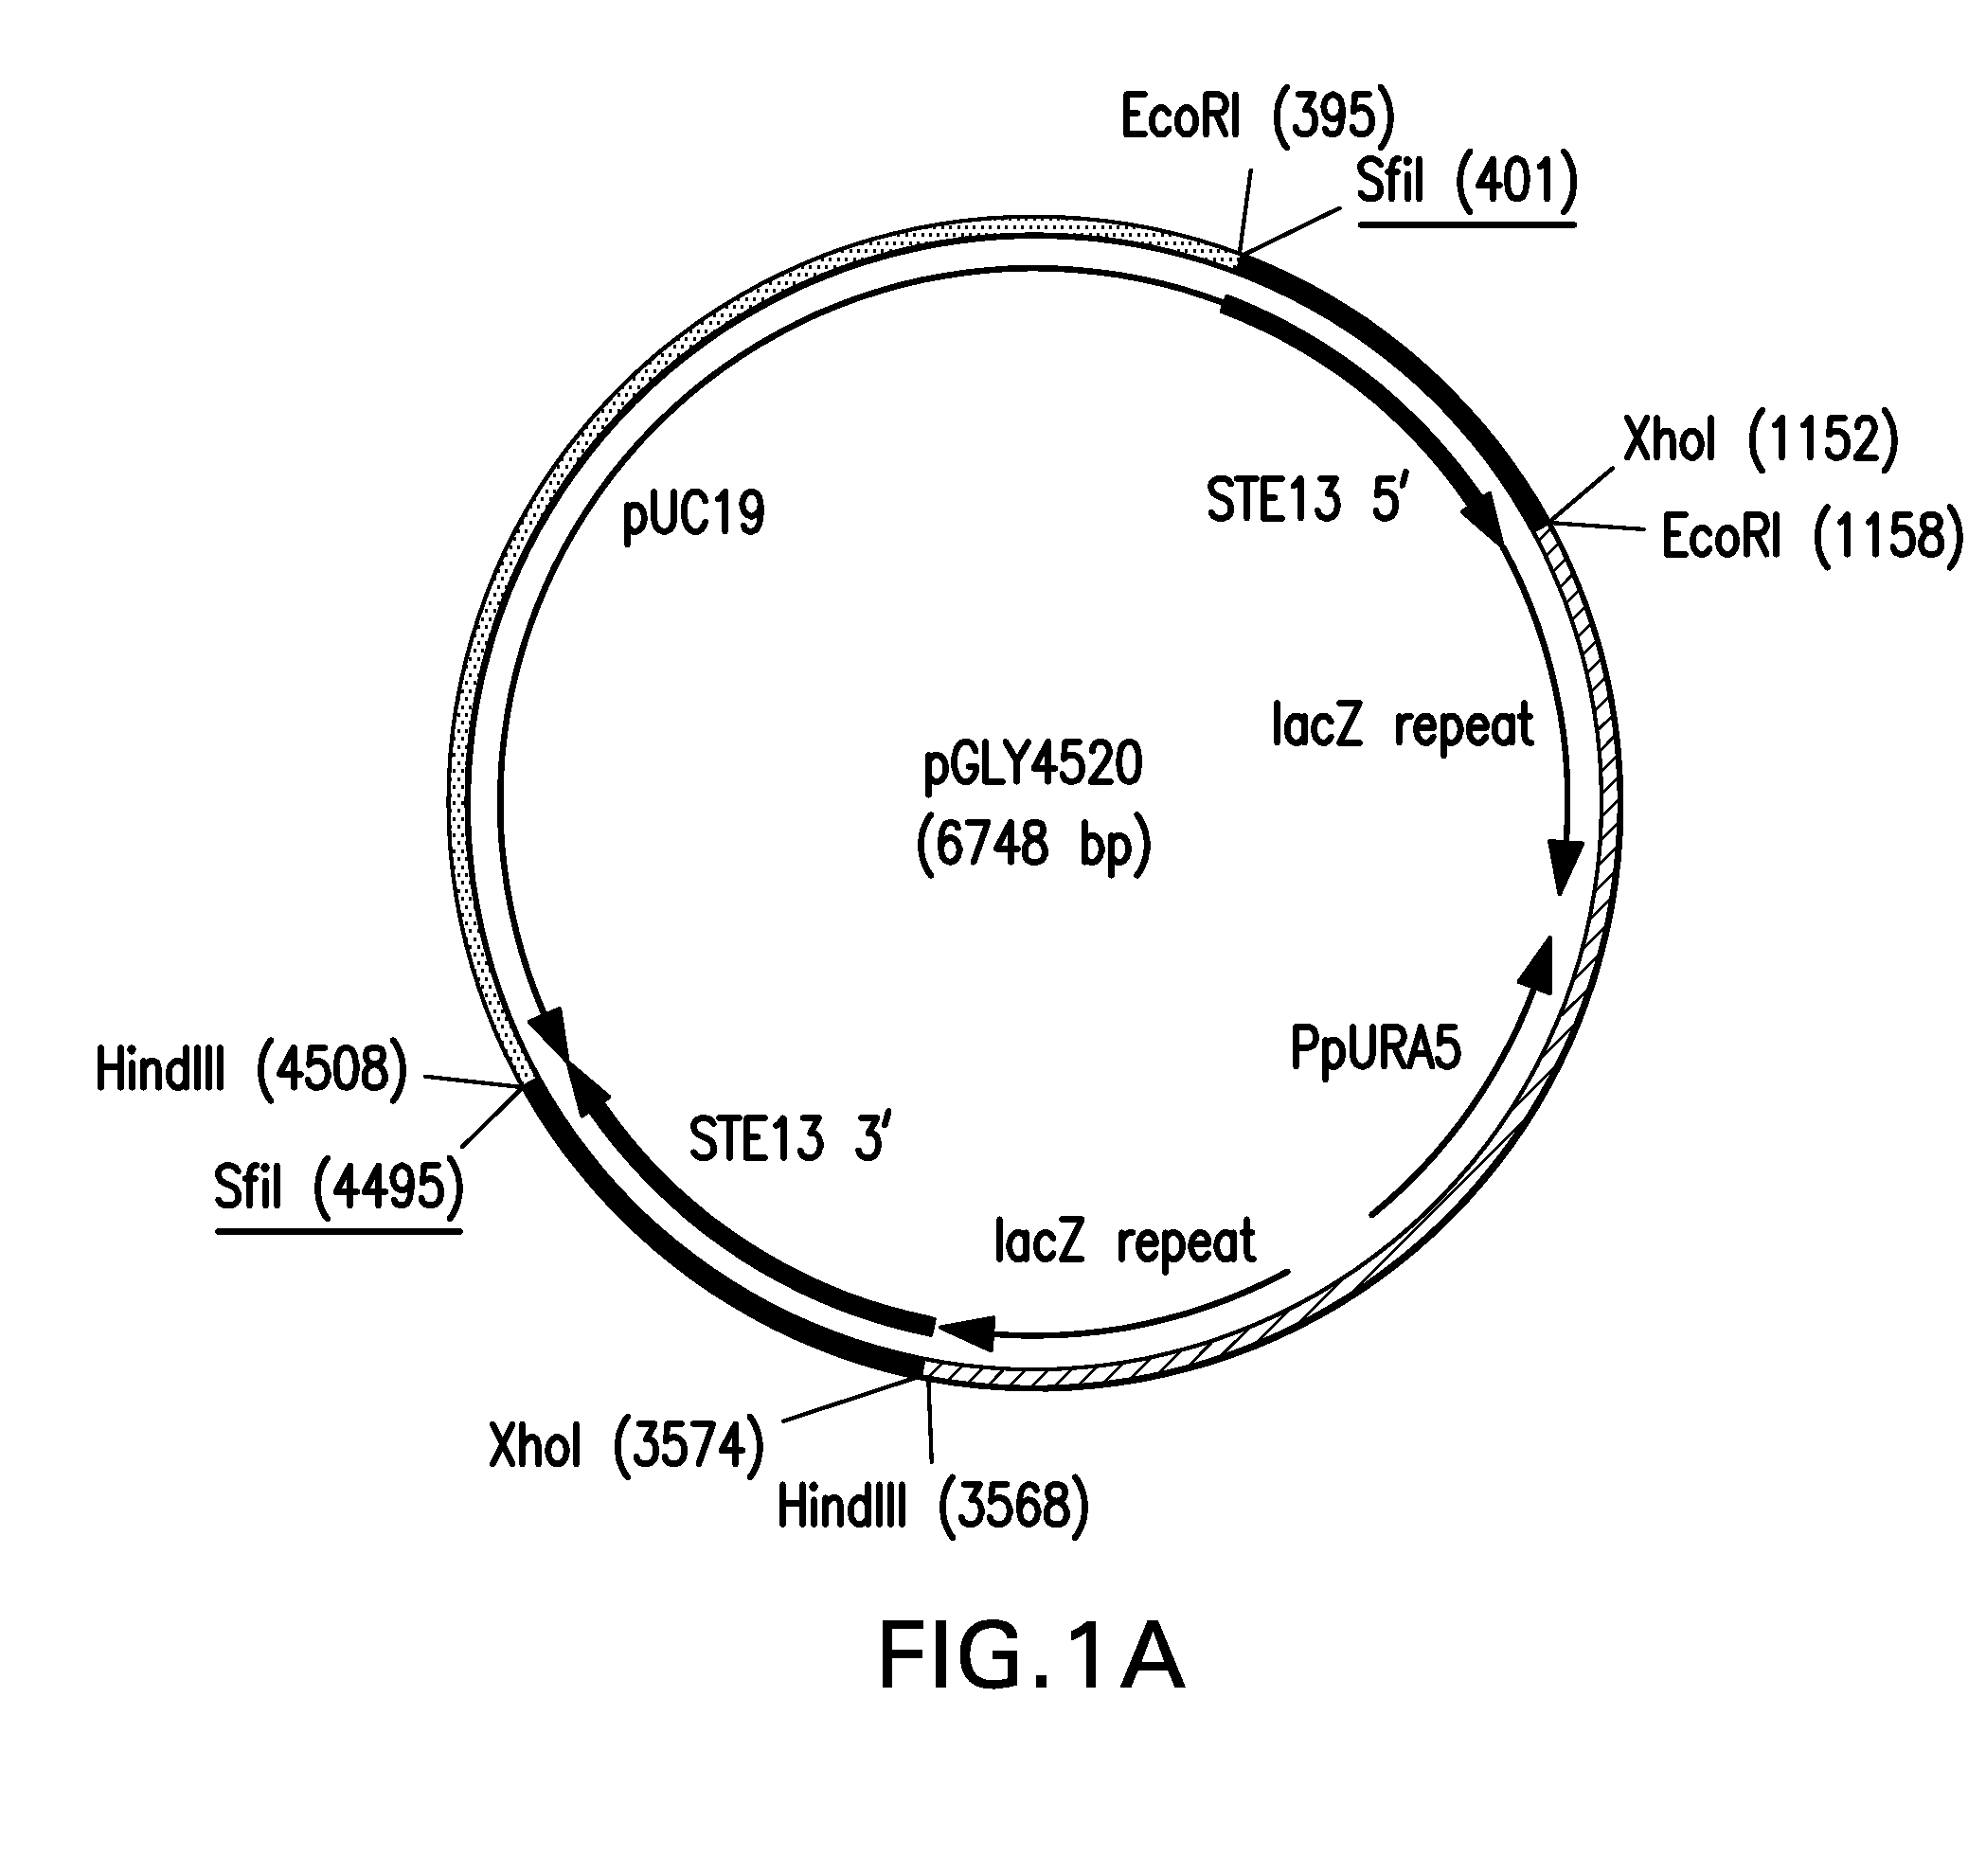 Method for producing therapeutic proteins in pichia pastoris lacking dipeptidyl aminopeptidase activity